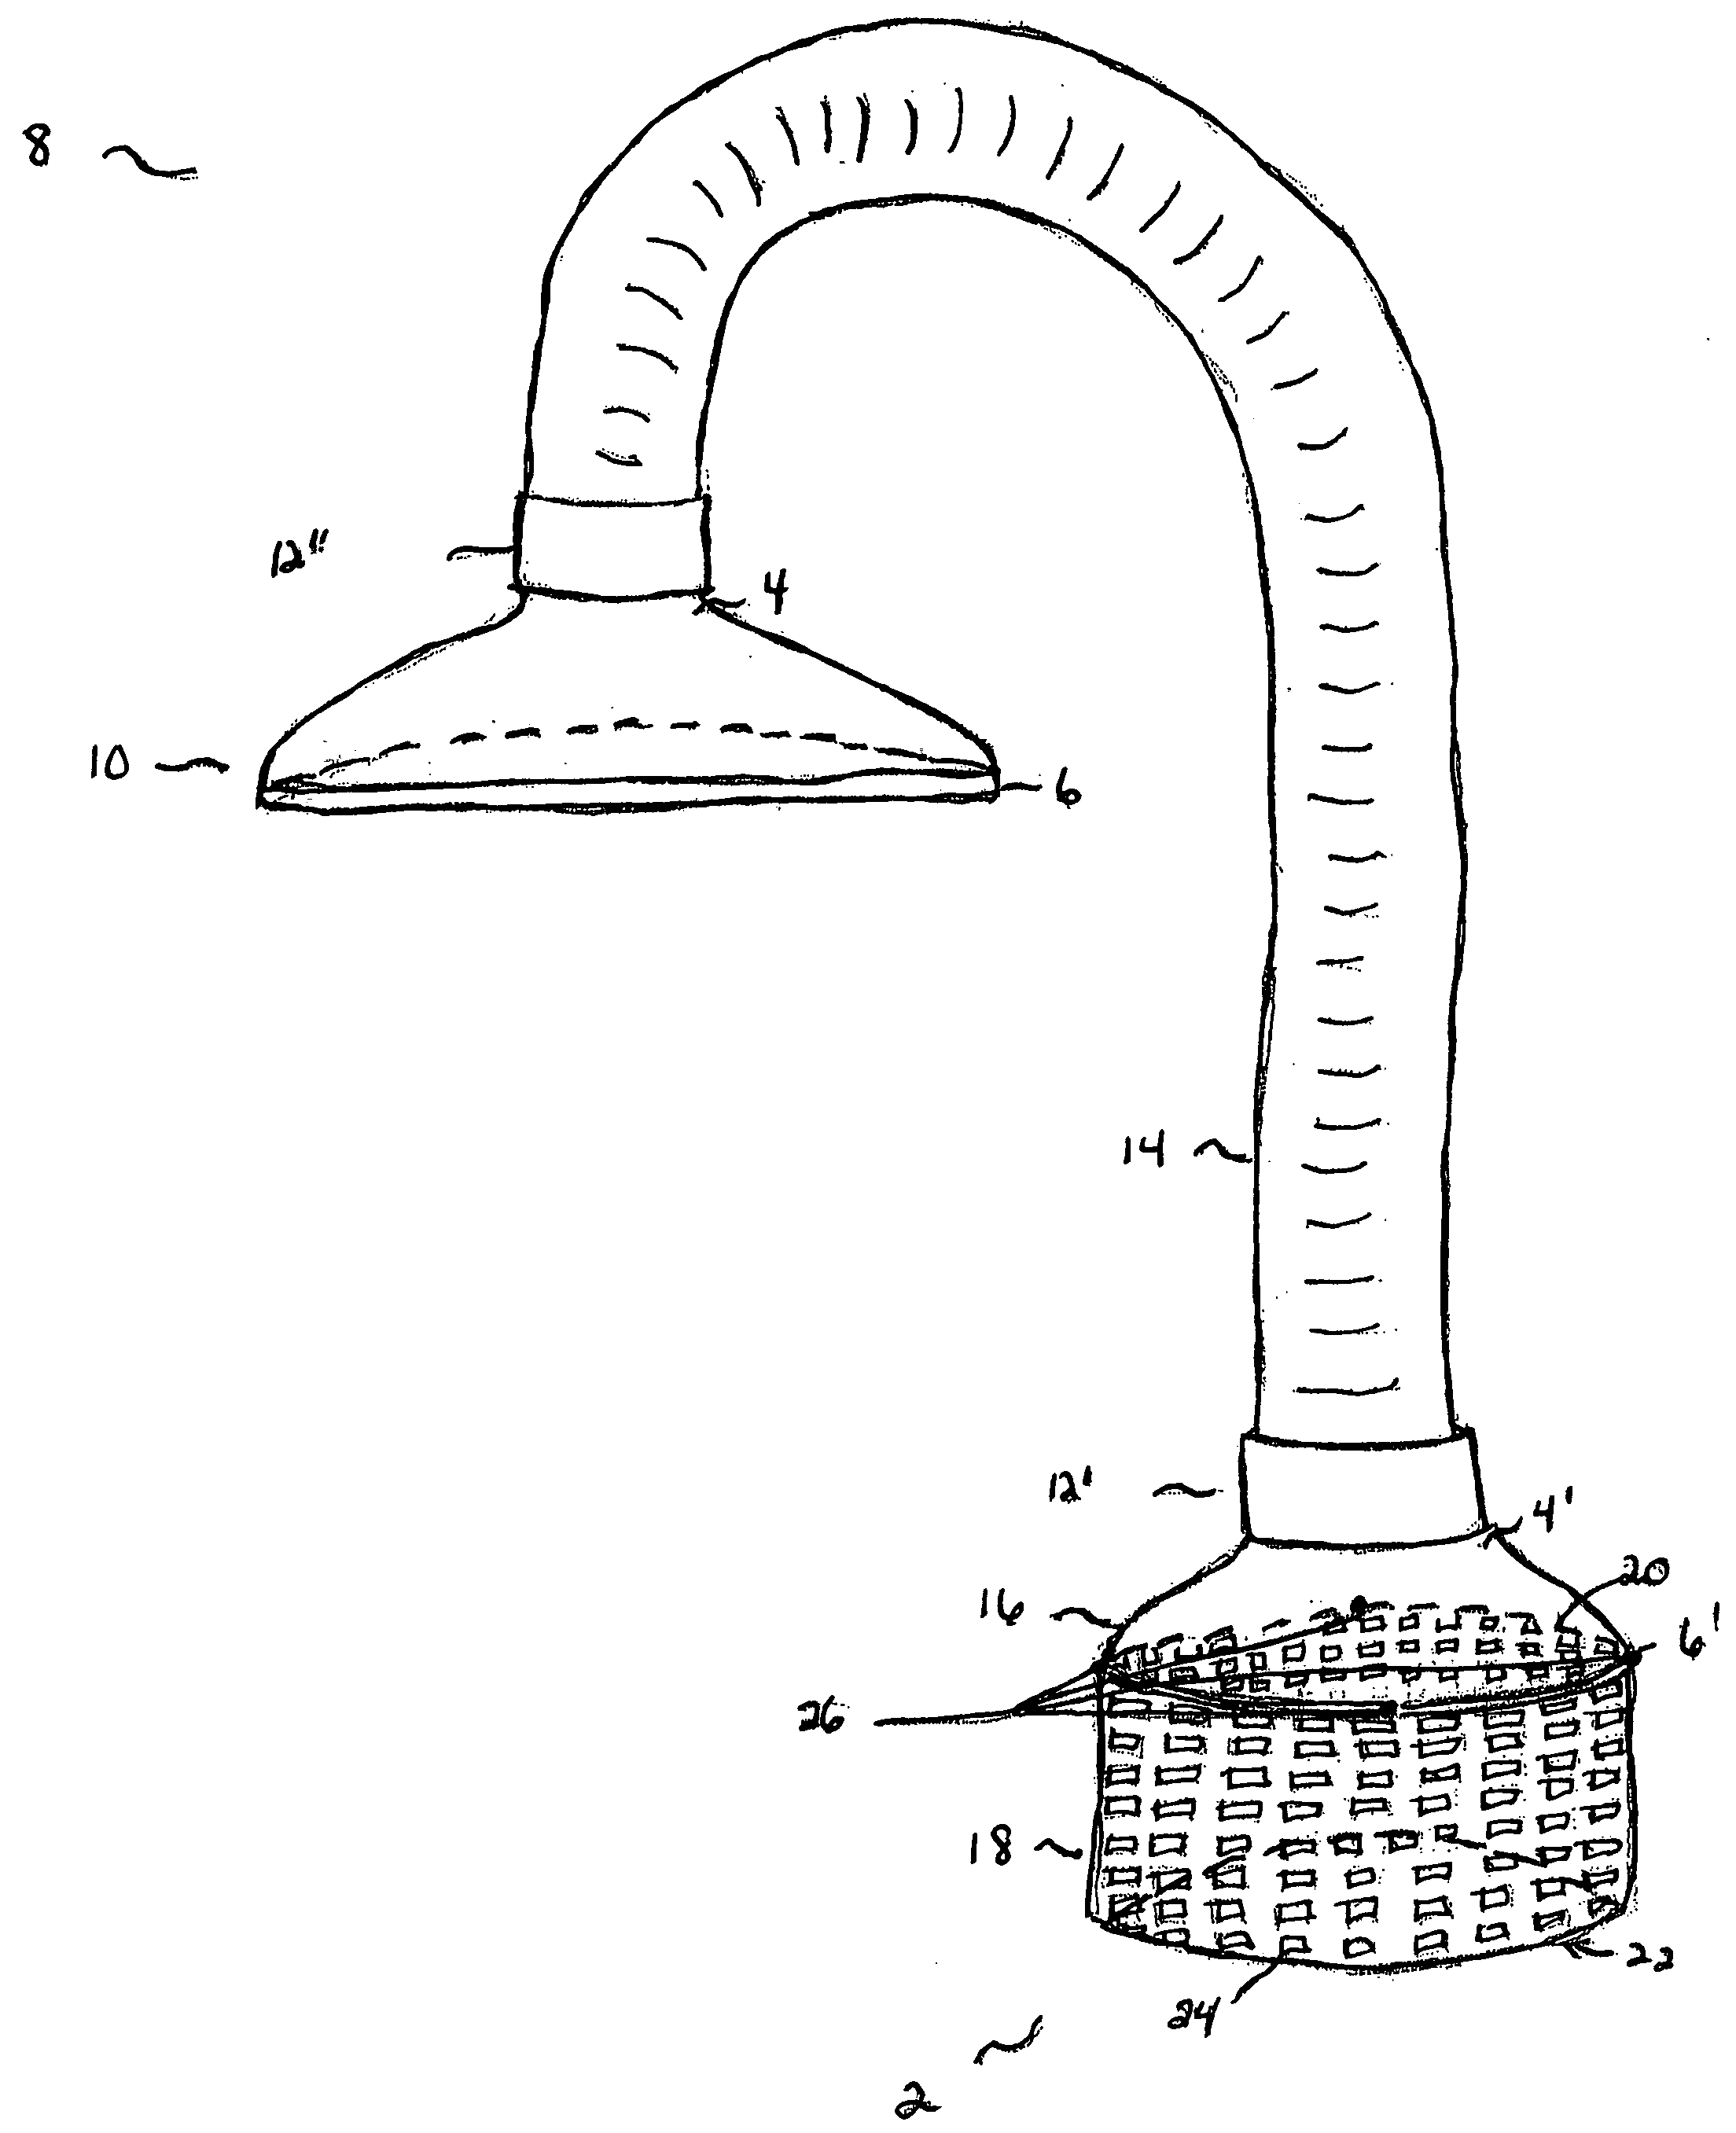 Apparatus and method for eliminating debris from a contained body of liquid